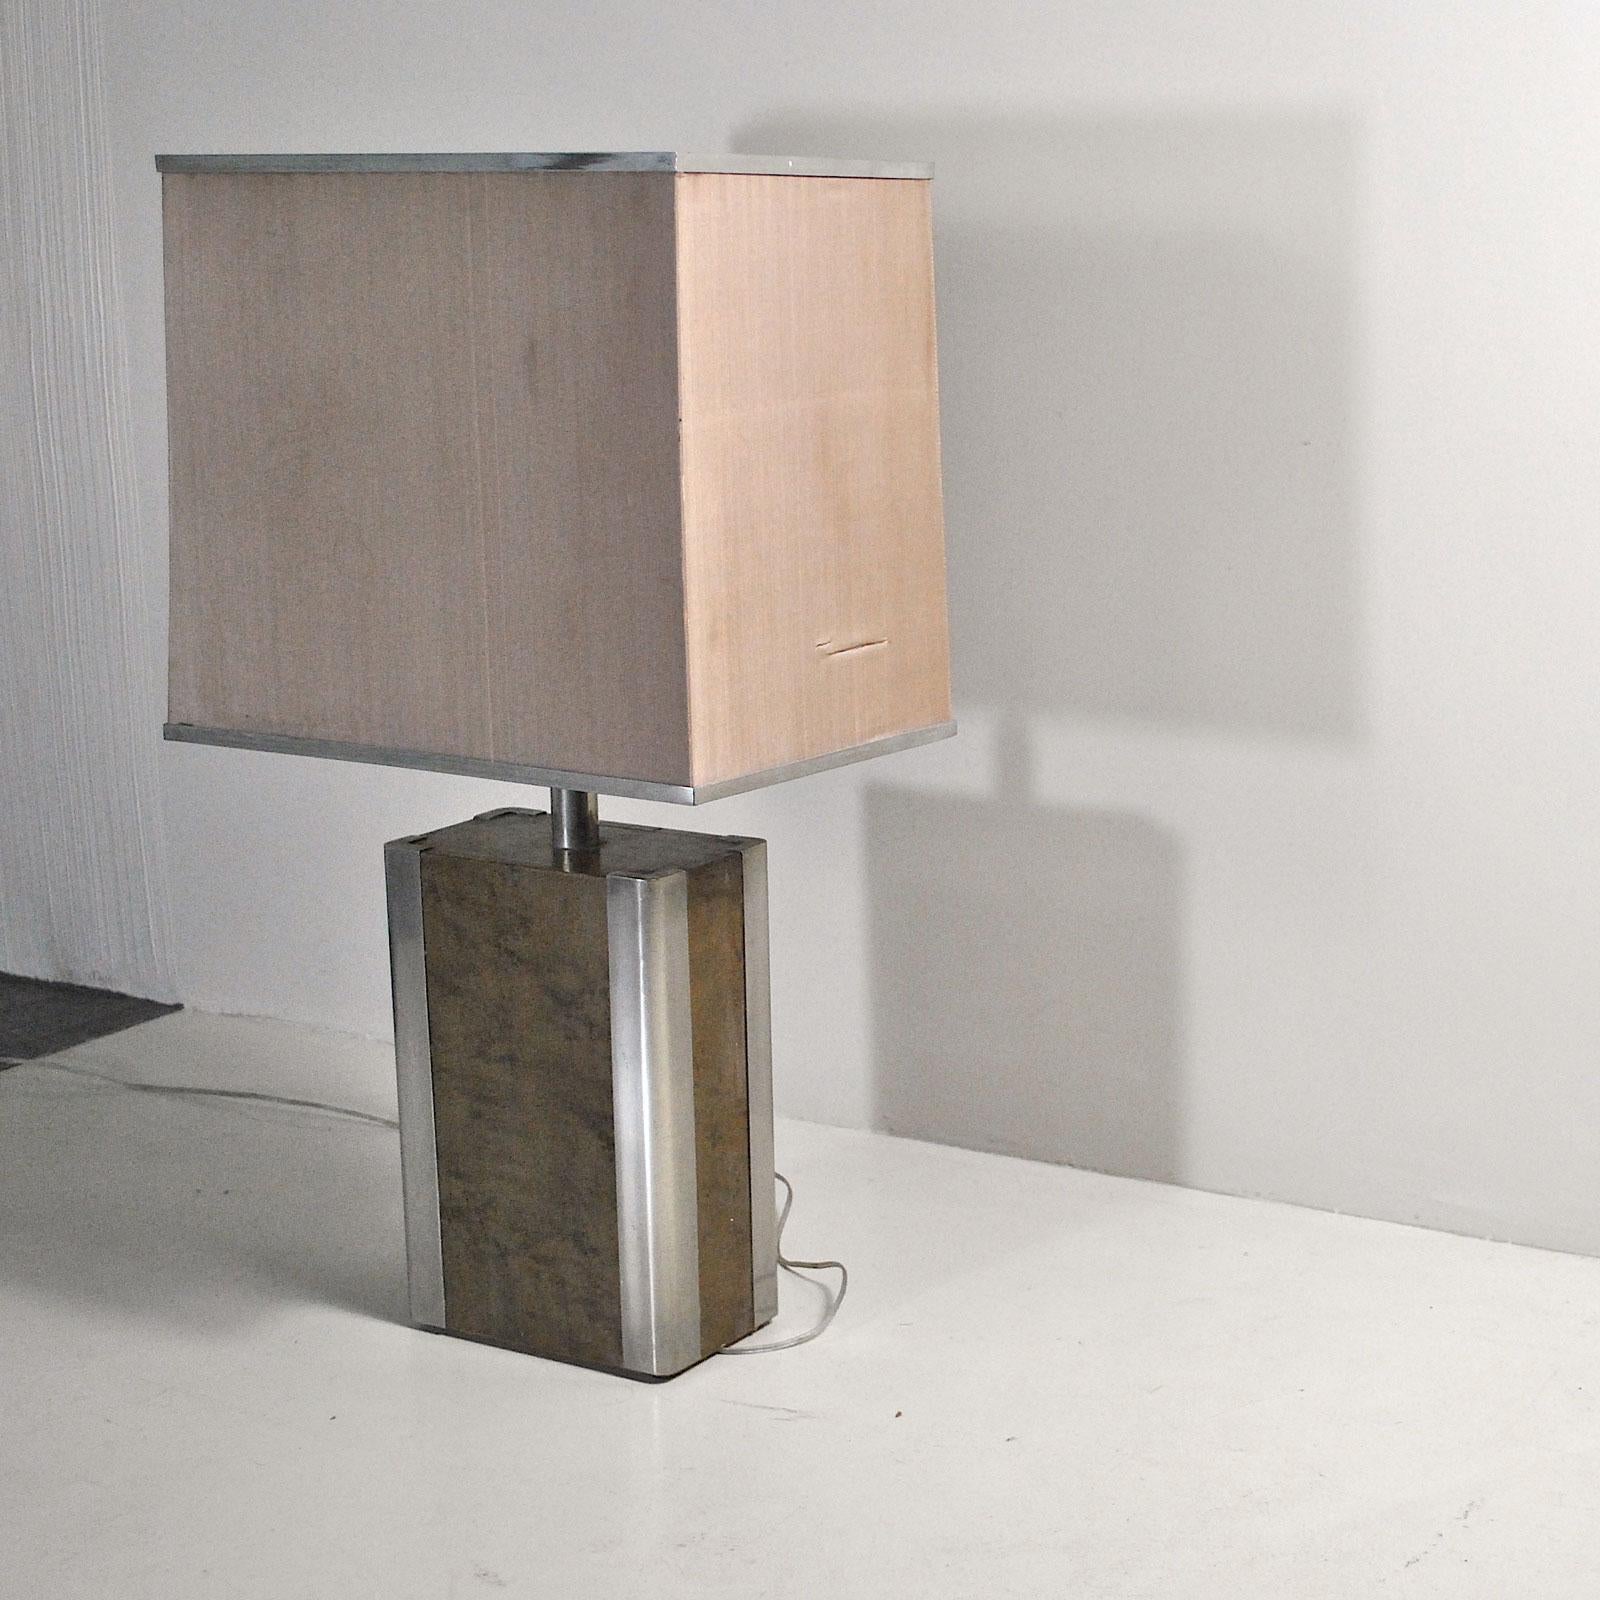 Italian Midcentury Table Lamp in Drawn Wood and Steel from the 1970s For Sale 1